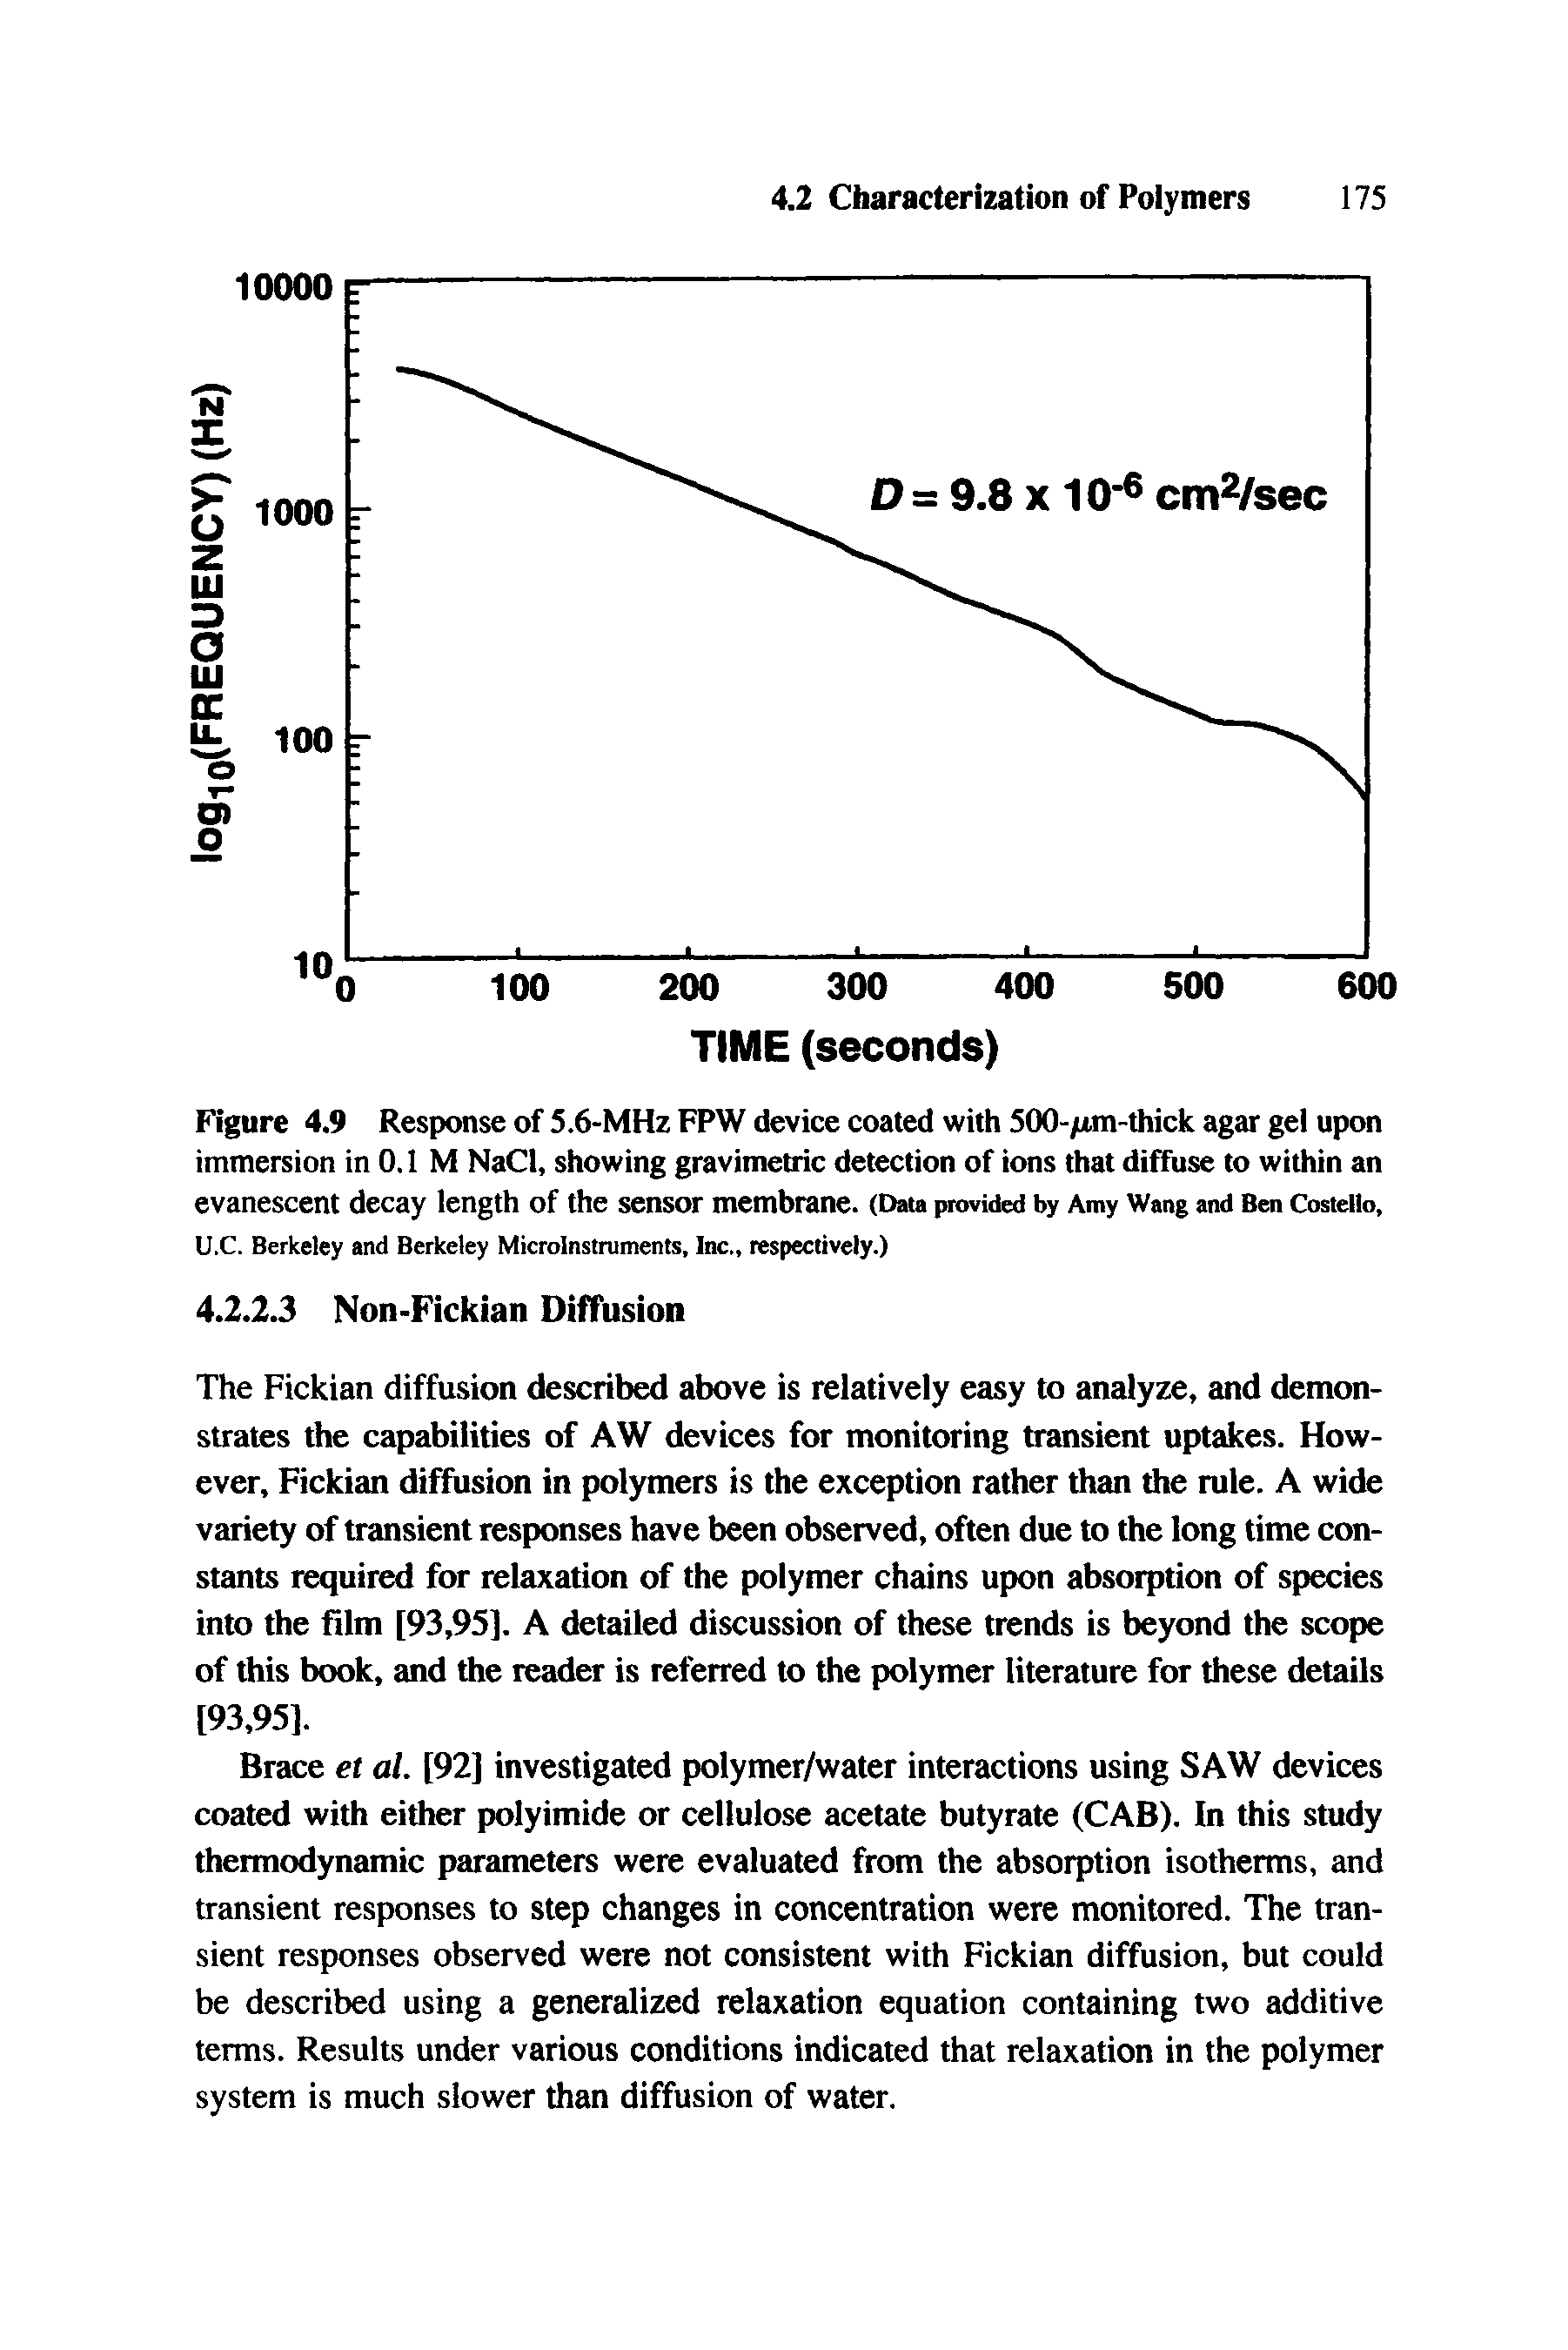 Figure 4.9 Response of 5.6-MHz FPW device coated with S00-/m-thick agar gel upon immersion in 0.1 M NaCl, showing gravimetric detection of ions that diffuse to within an evanescent decay length of the sensor membrane. (Dam provided by Amy Wang and Ben Cosieiio, U.C. Berkeley and Berkeley Microlnsiruments, Inc., respectively.)...